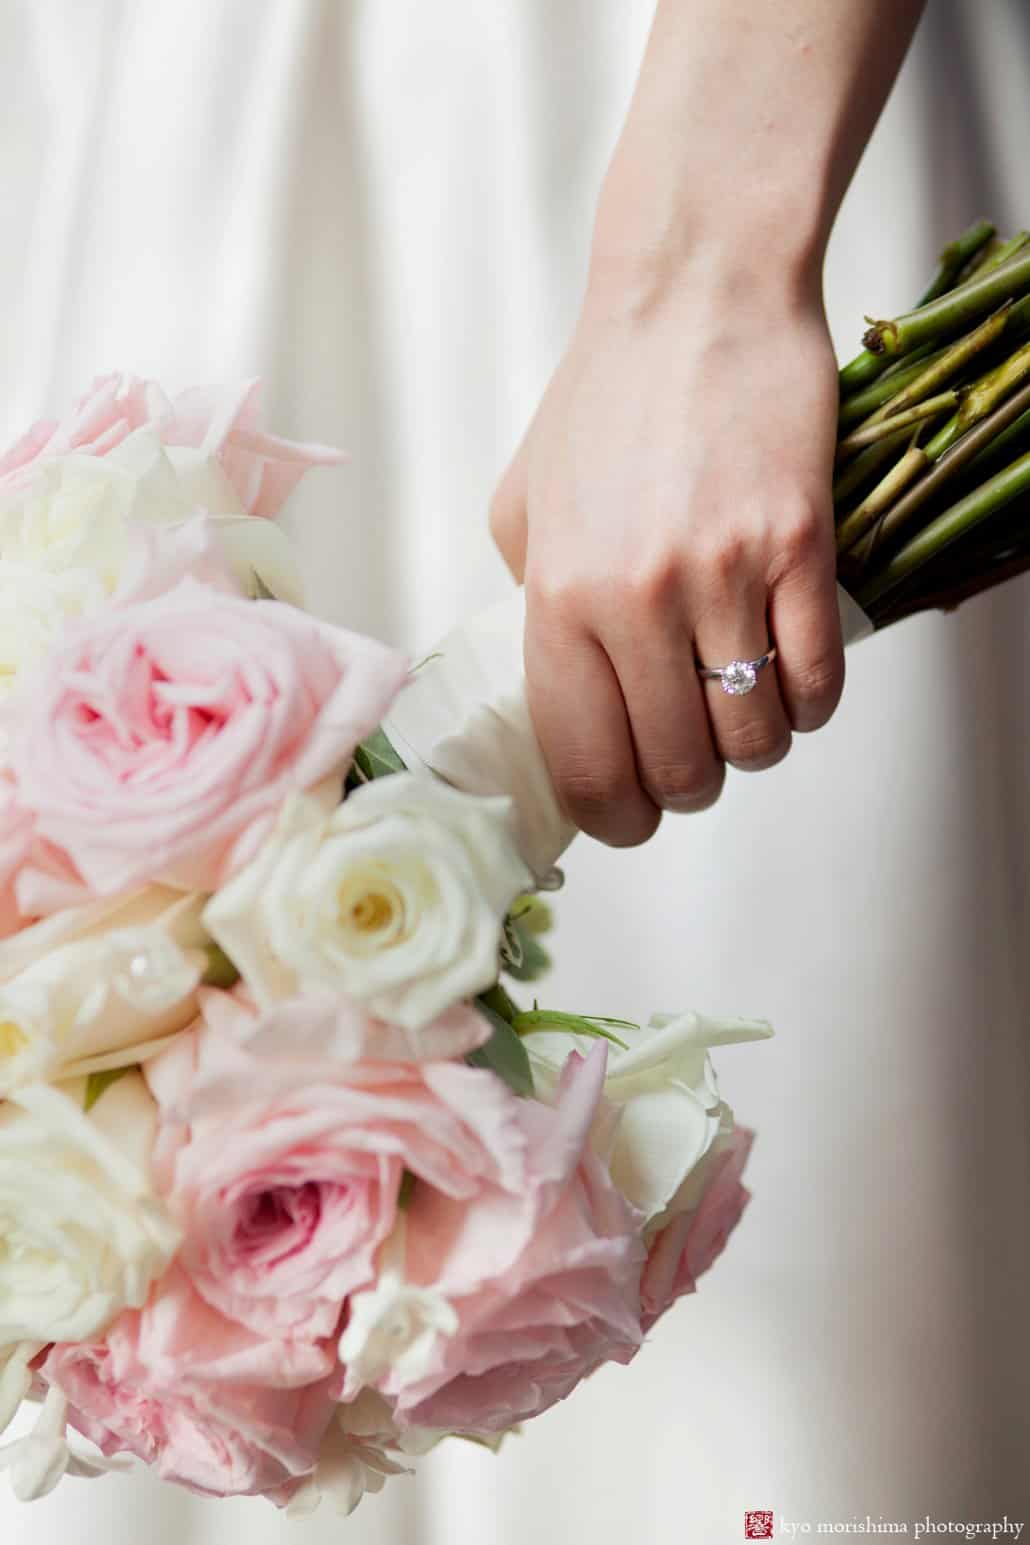 Bride holds pink and white rose wedding bouquet by Diva Flowers, photographed by NYC candid wedding photographer Kyo Morishima